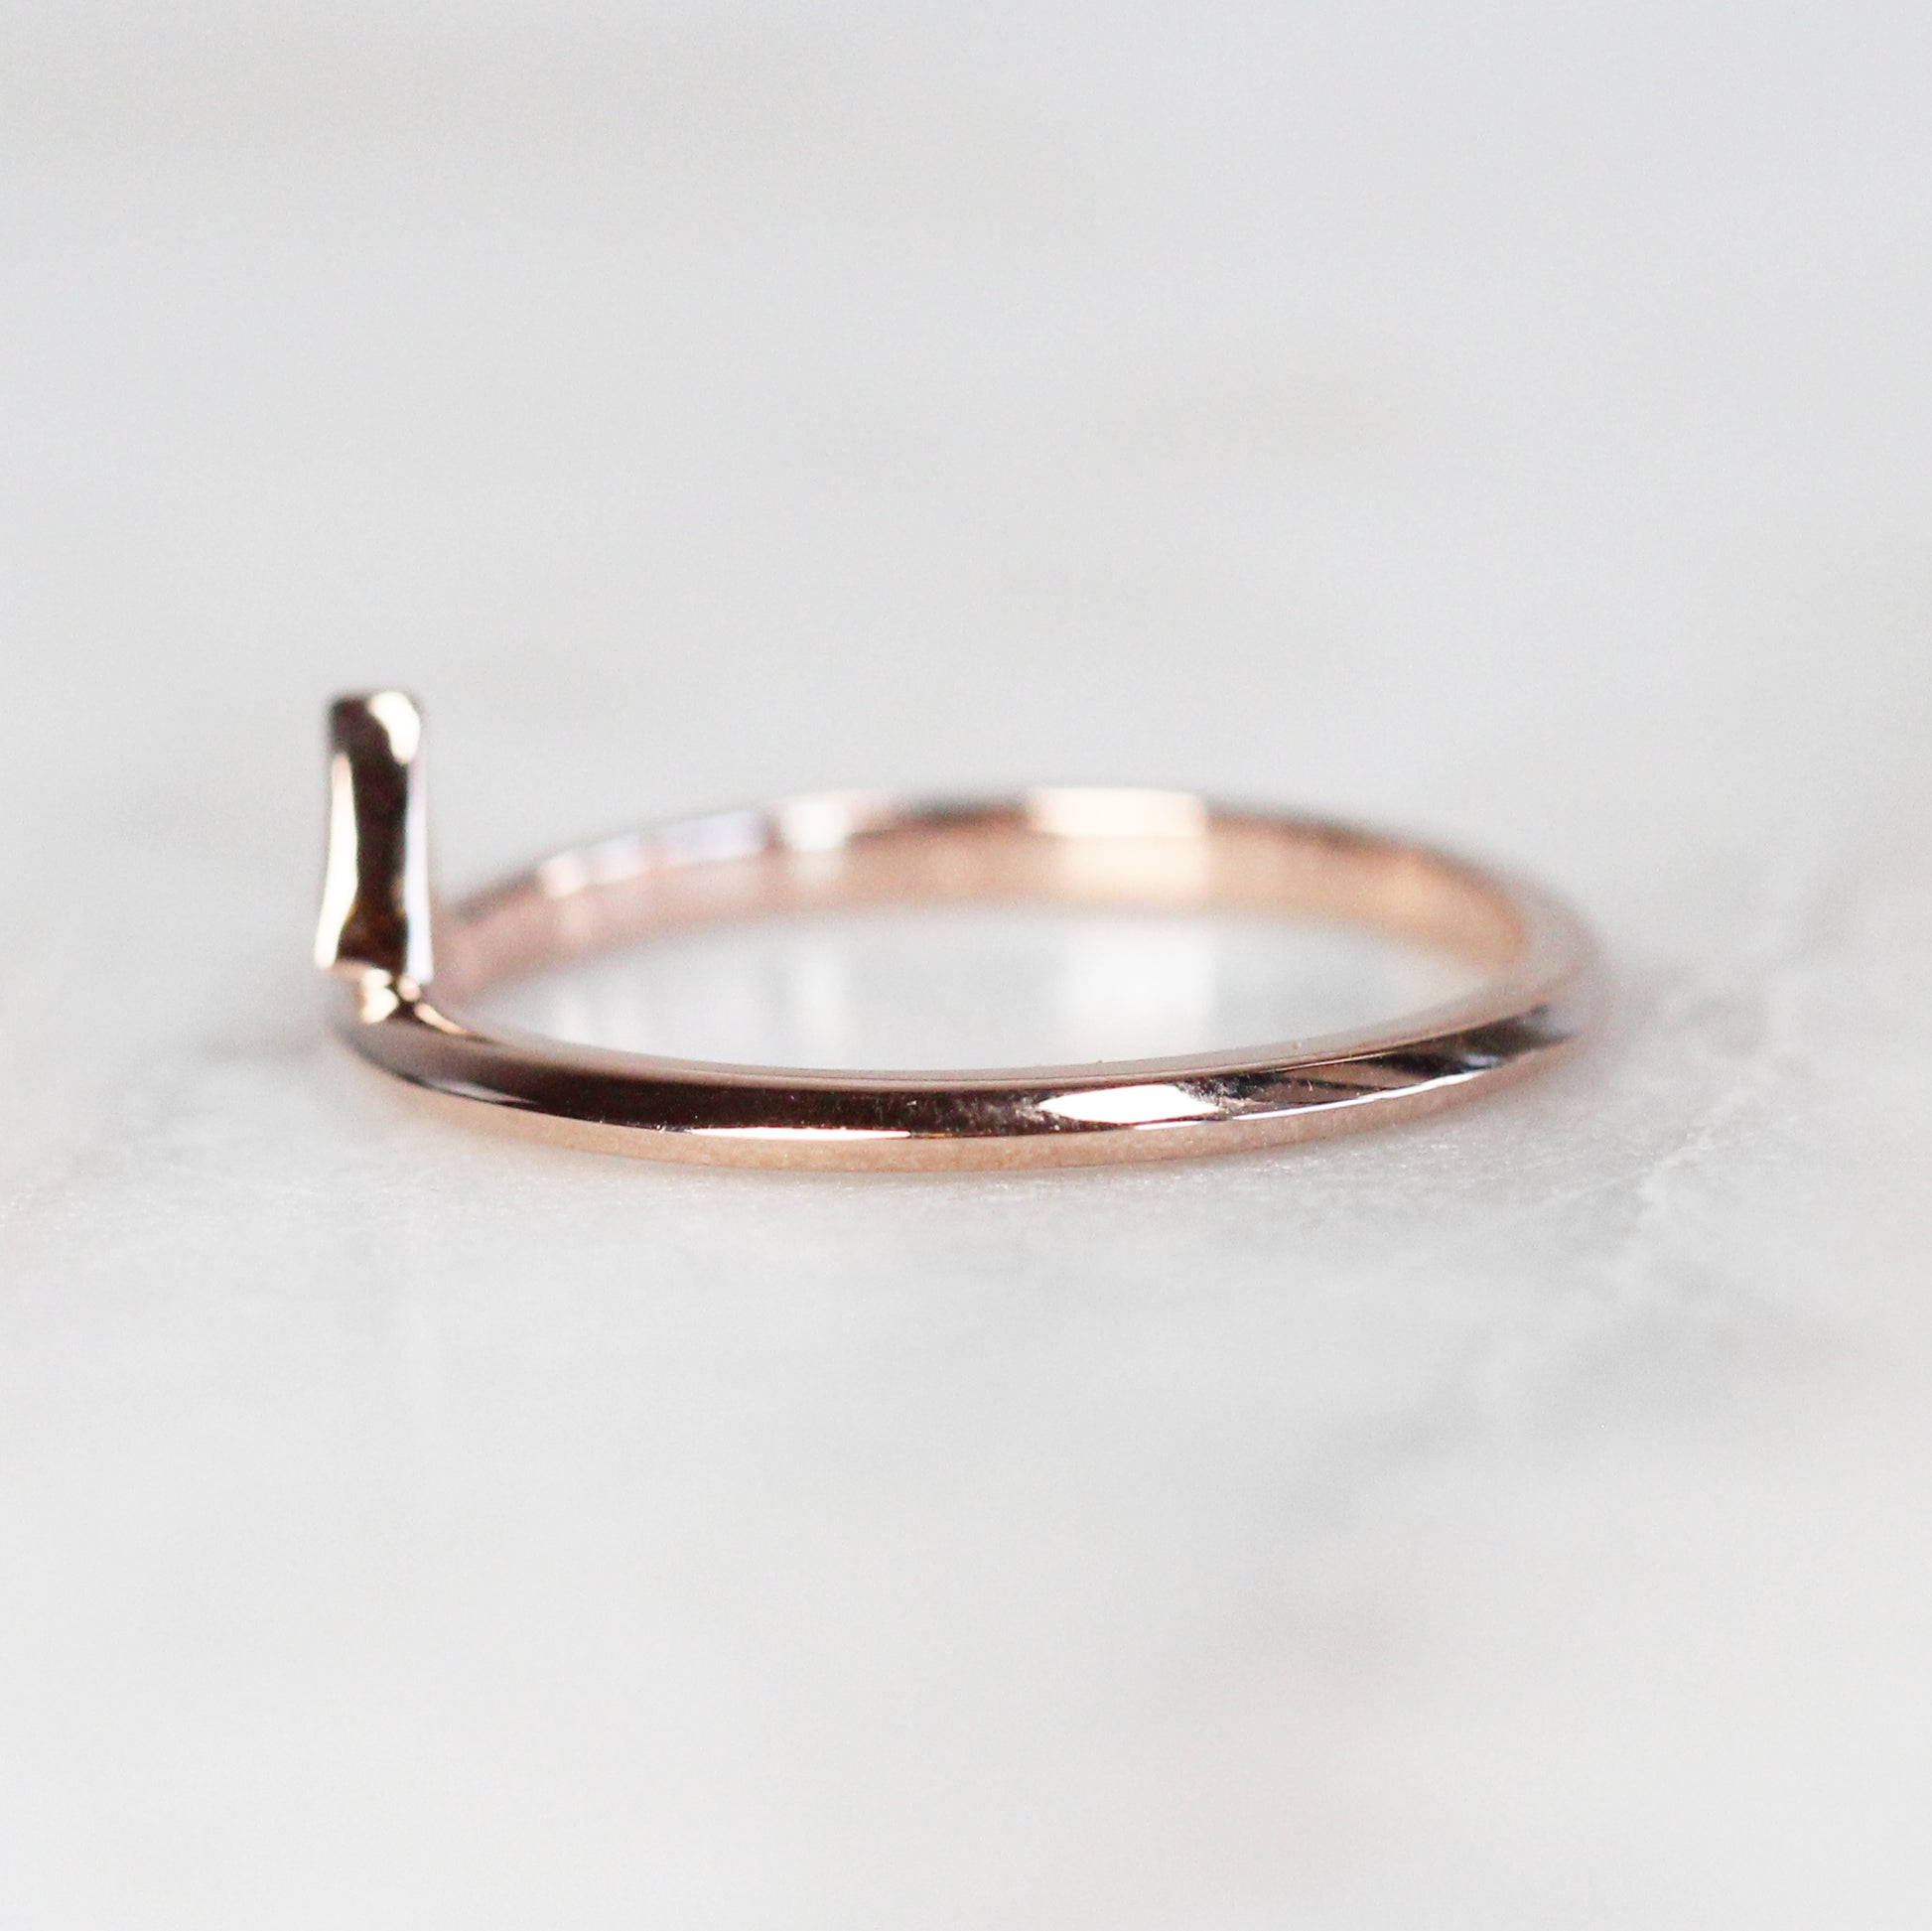 Minimal Diamond Triangle Stacking Ring in 14k Rose Gold - Ready to Size and Ship - Midwinter Co. Alternative Bridal Rings and Modern Fine Jewelry